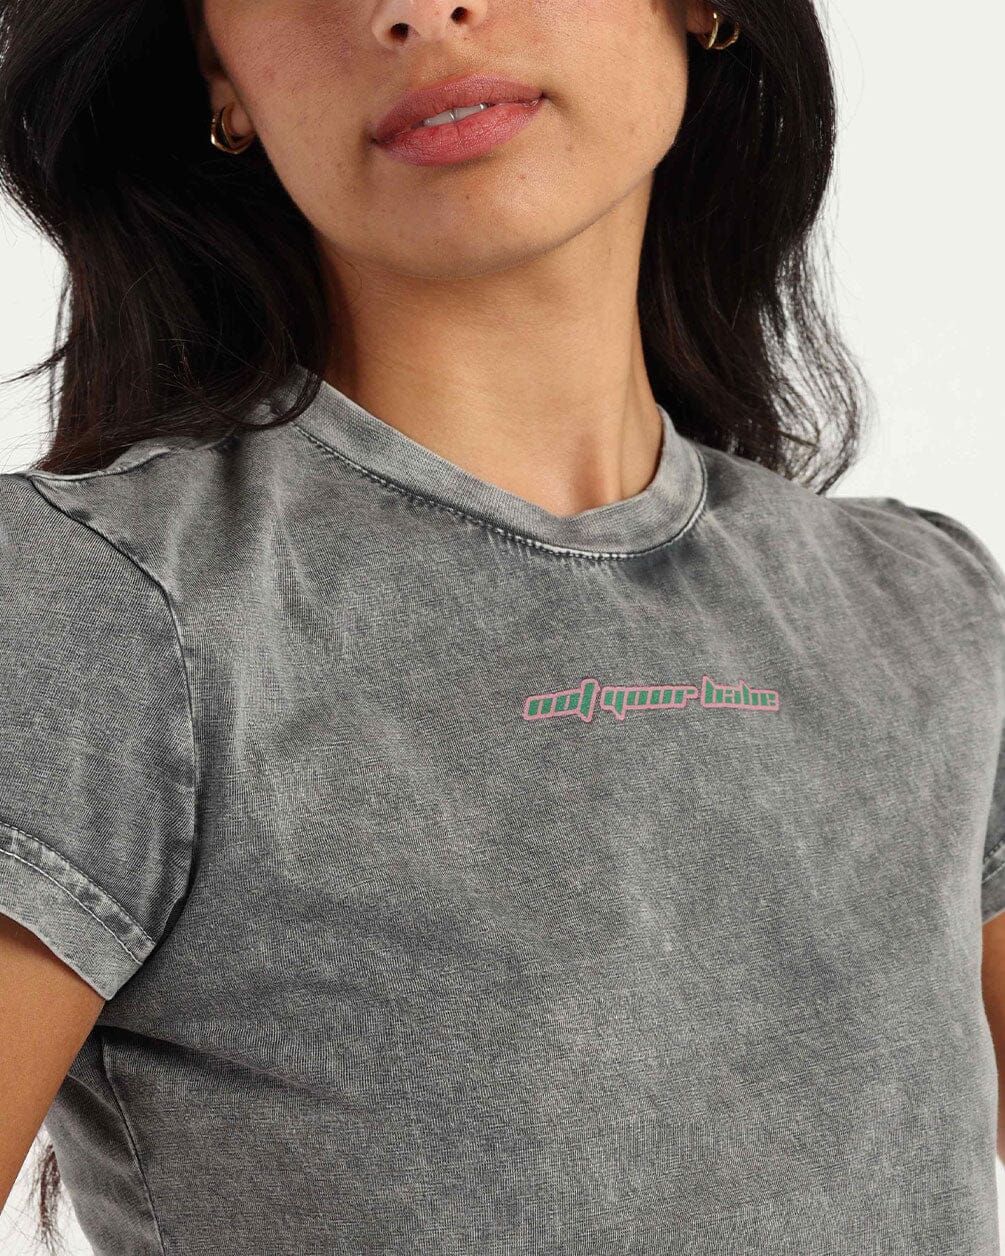 Not Your Baby Cropped Washed Tee Statement Cropped Tee IN YOUR SHOE M 